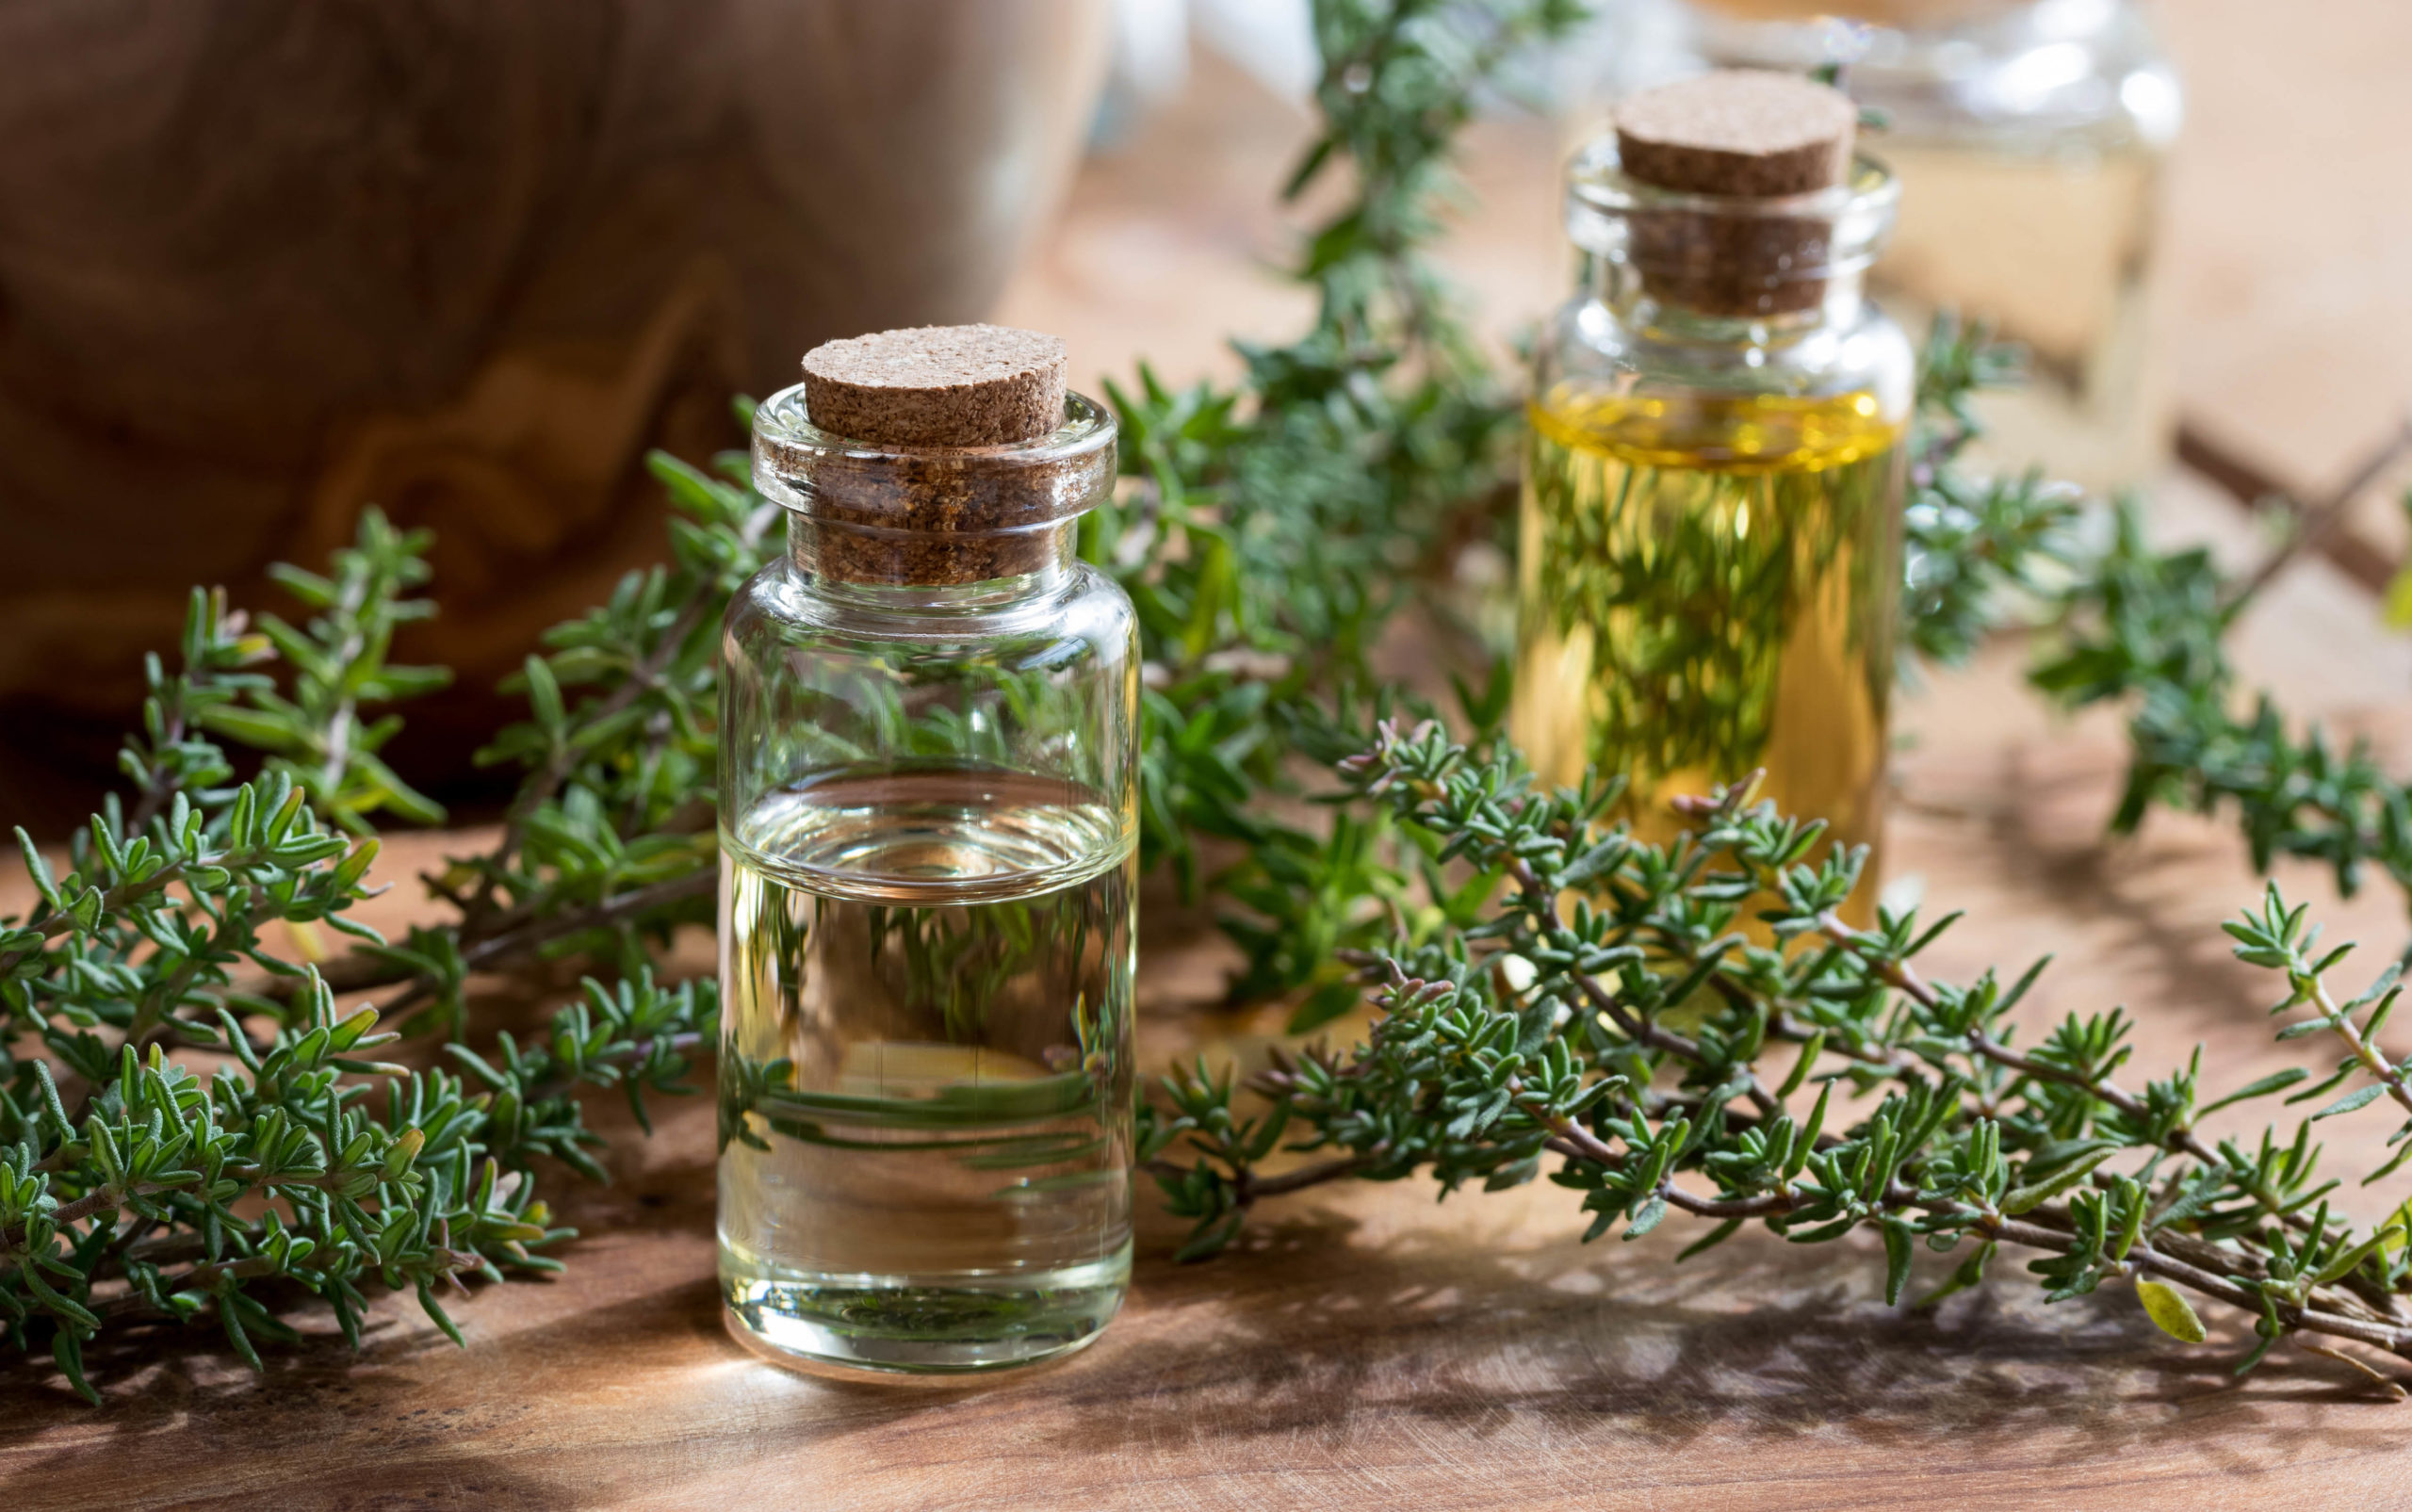 Aroma oils with Thyme